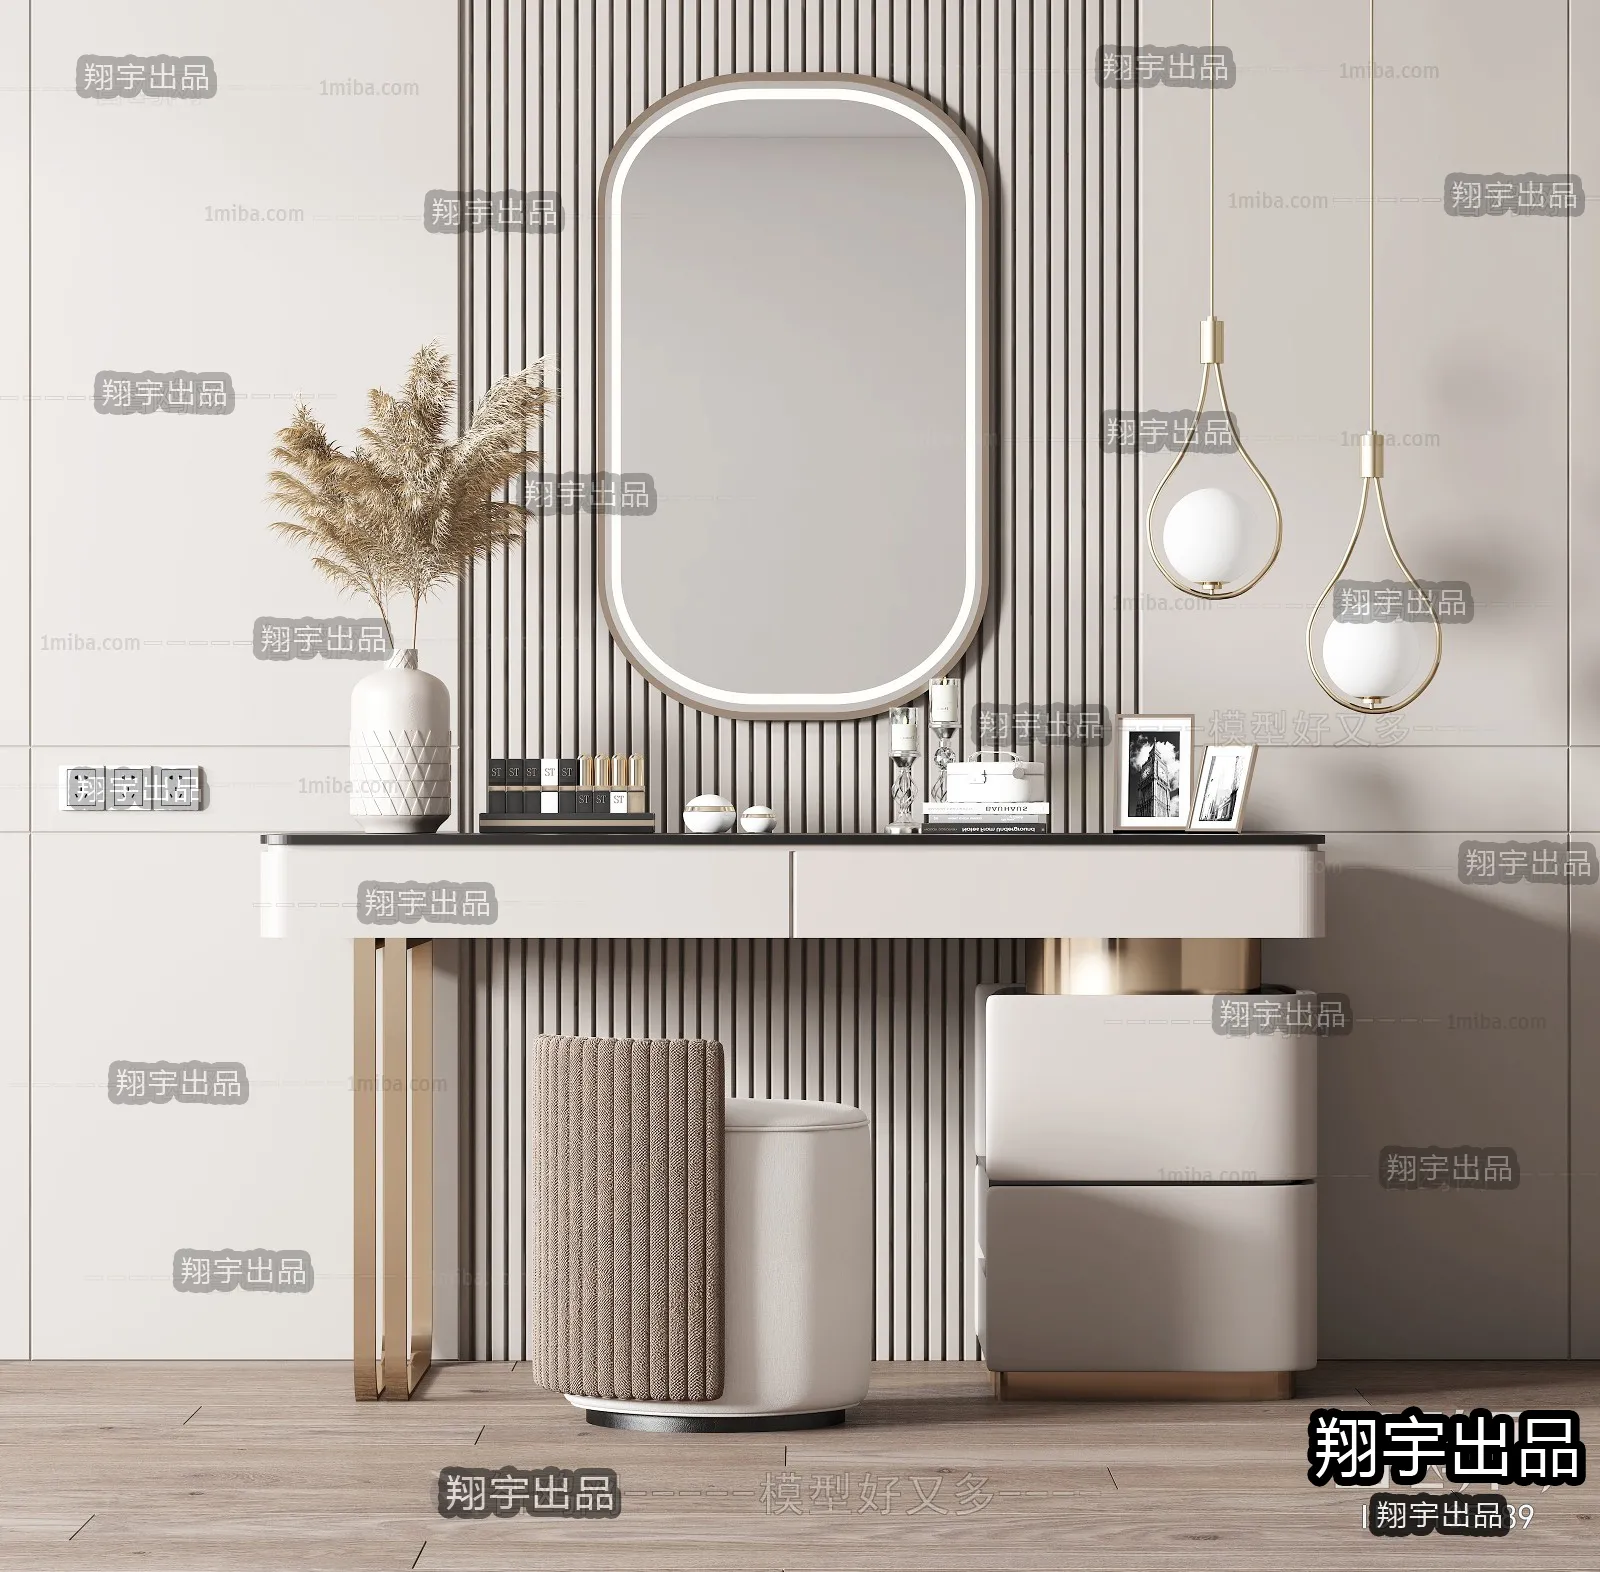 DRESSING TABLE – A8 – FURNITURE 3D MODELS 2022 (VRAY)